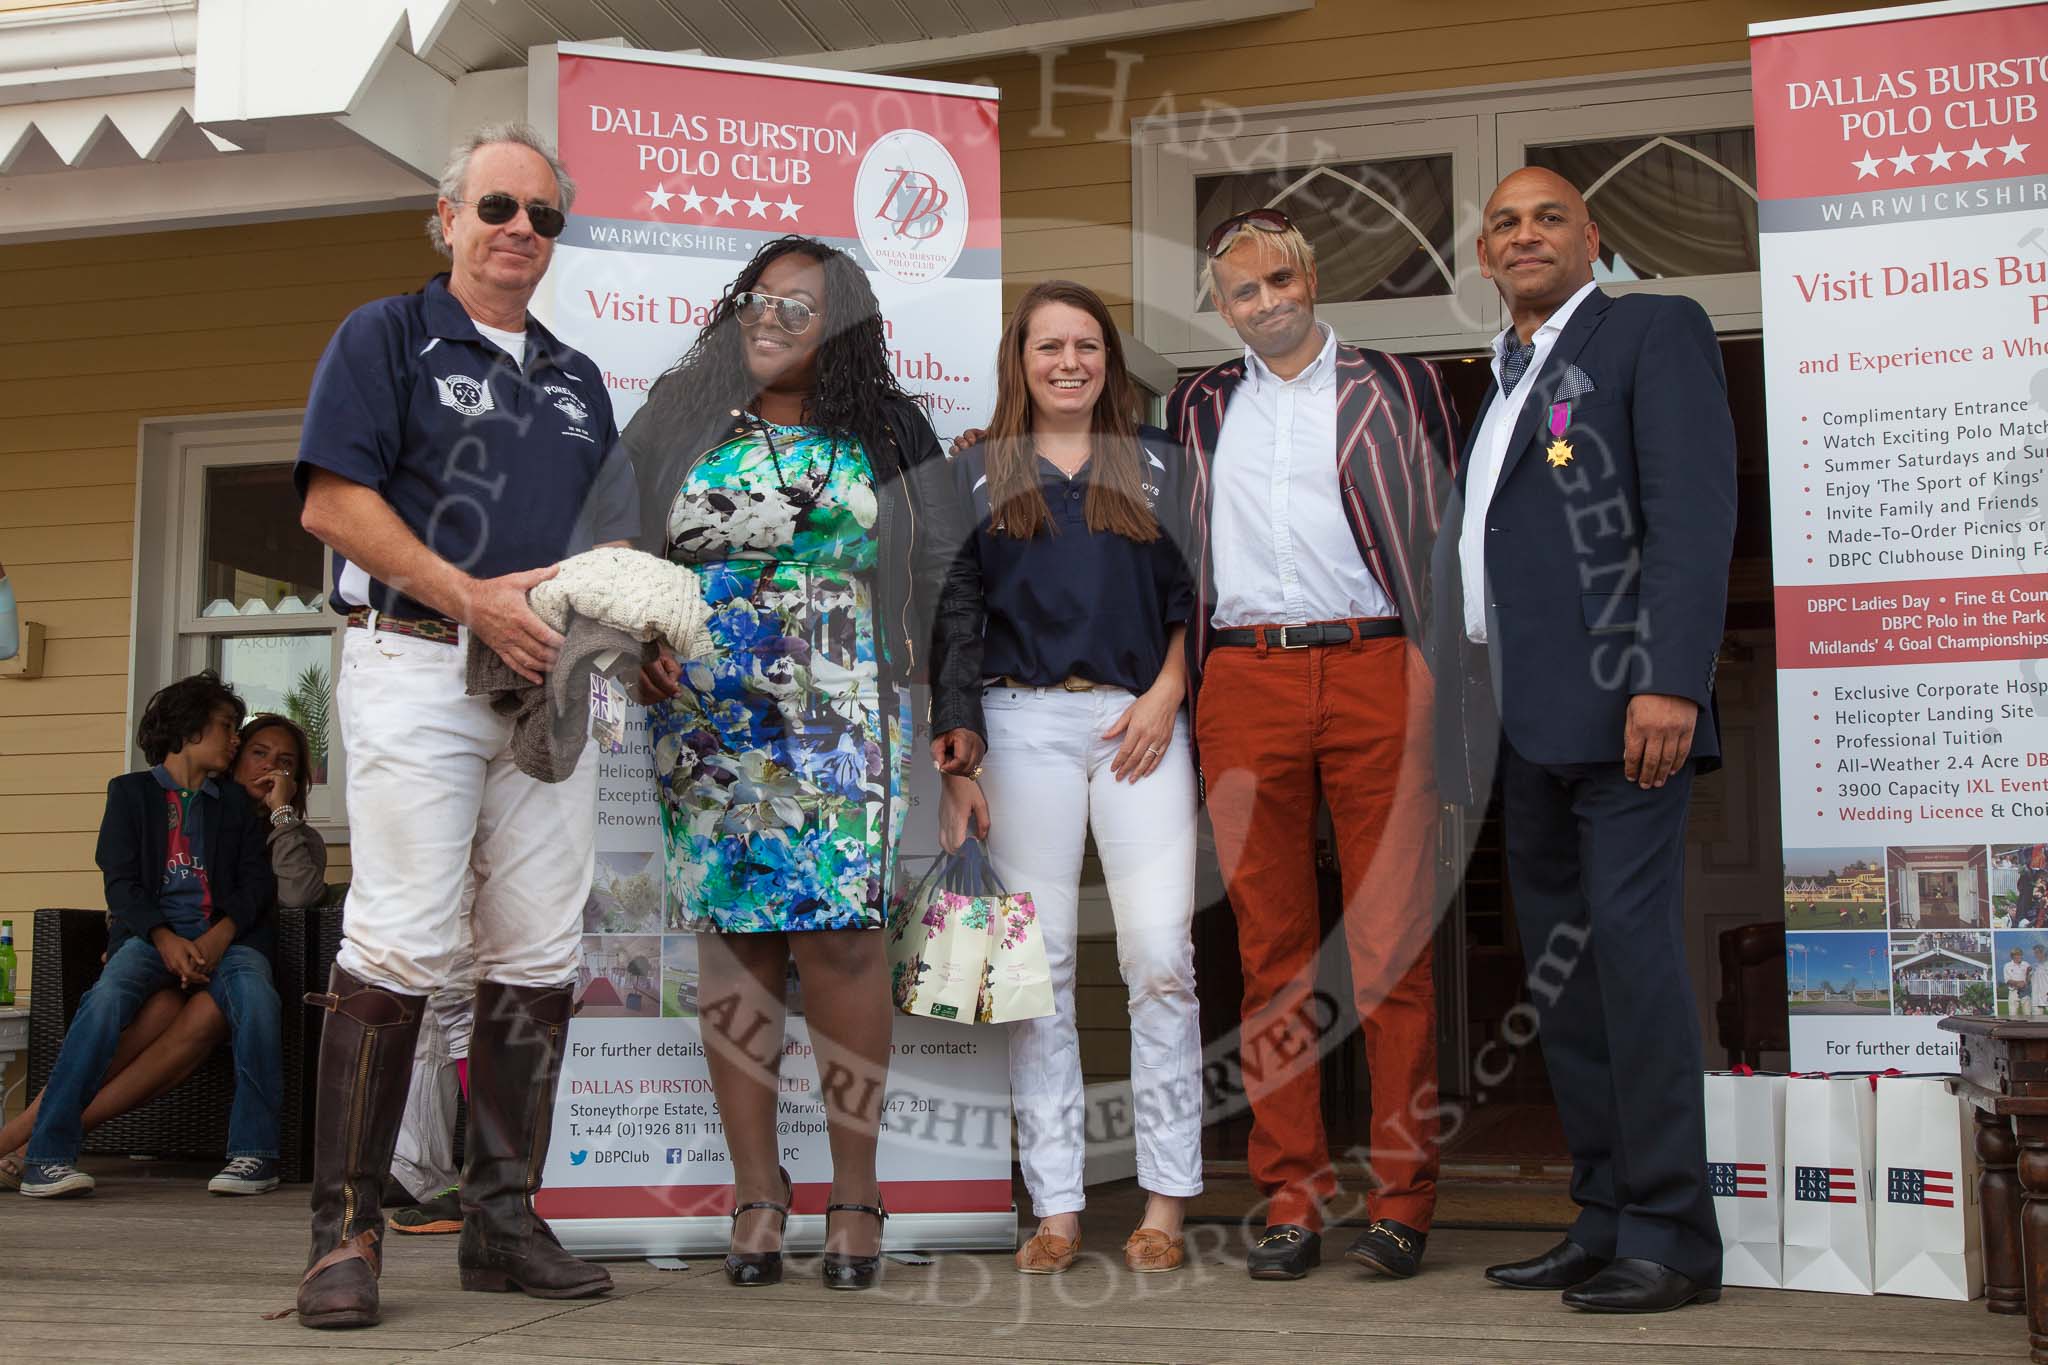 DBPC Polo in the Park 2013.
Dallas Burston Polo Club, ,
Southam,
Warwickshire,
United Kingdom,
on 01 September 2013 at 13:58, image #379